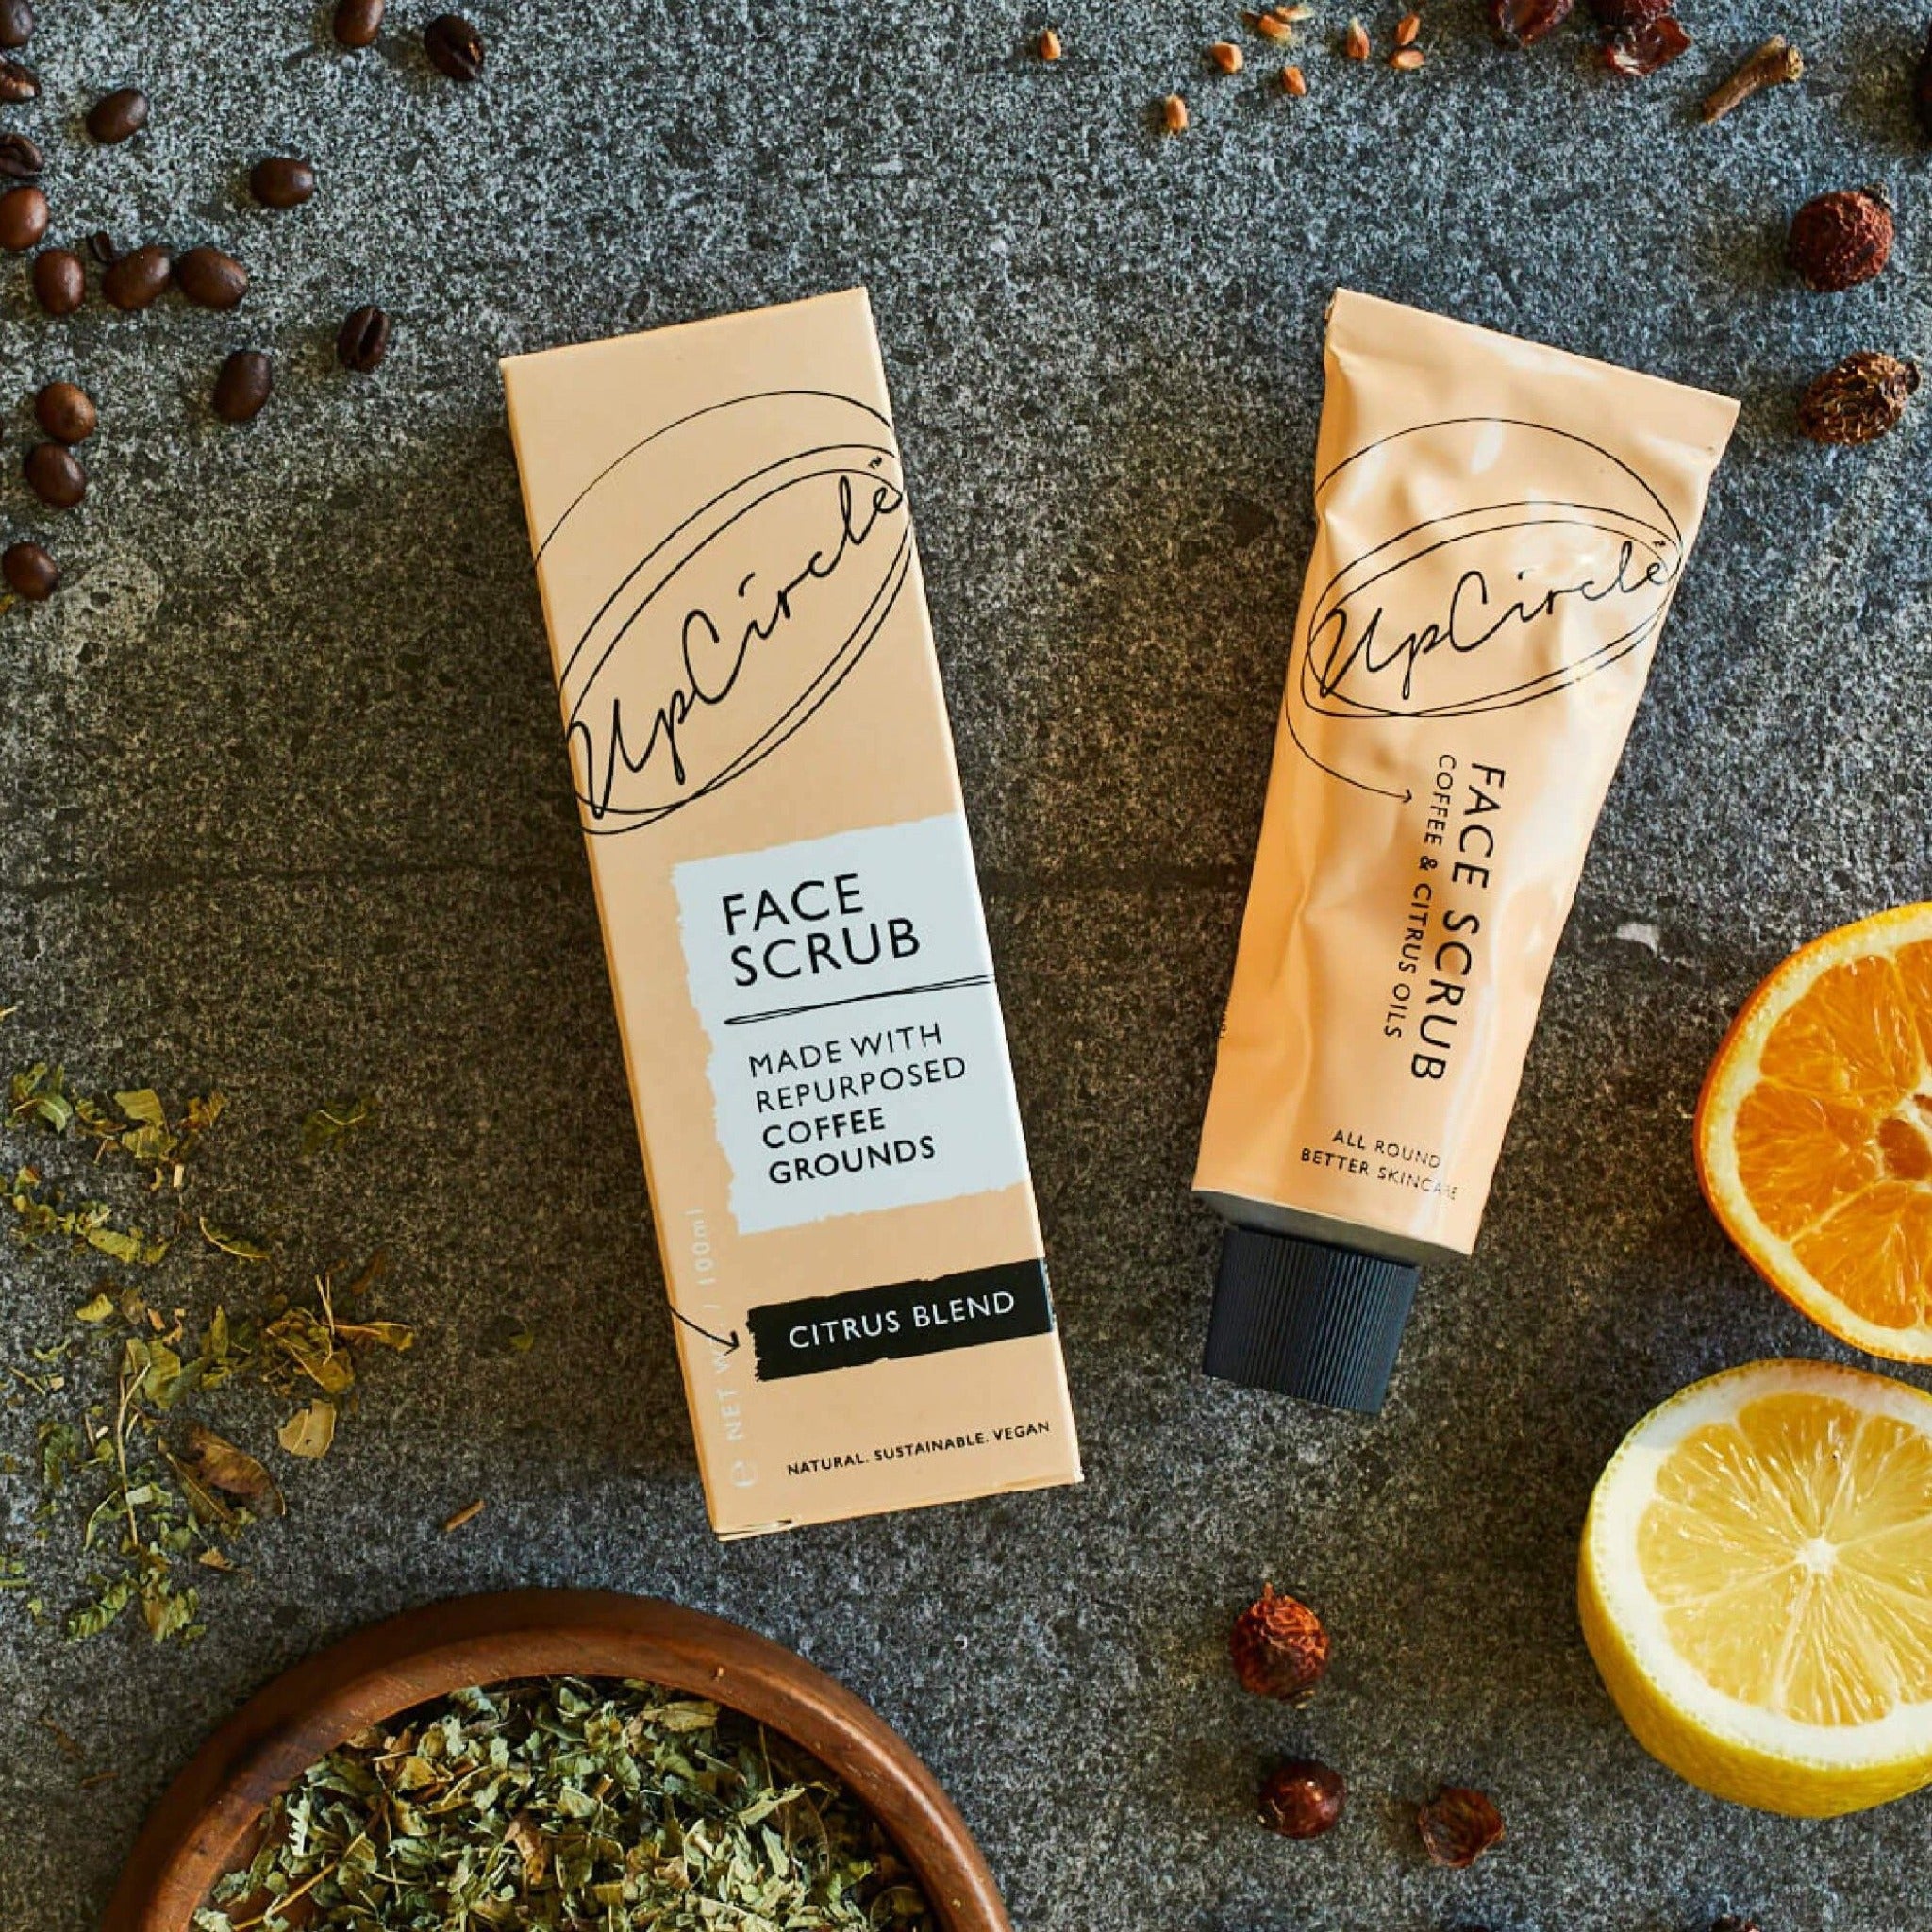 UpCircle face scrub of coffee and citrus oils aluminum tube with its package next to it and some spices and orange surrounding.